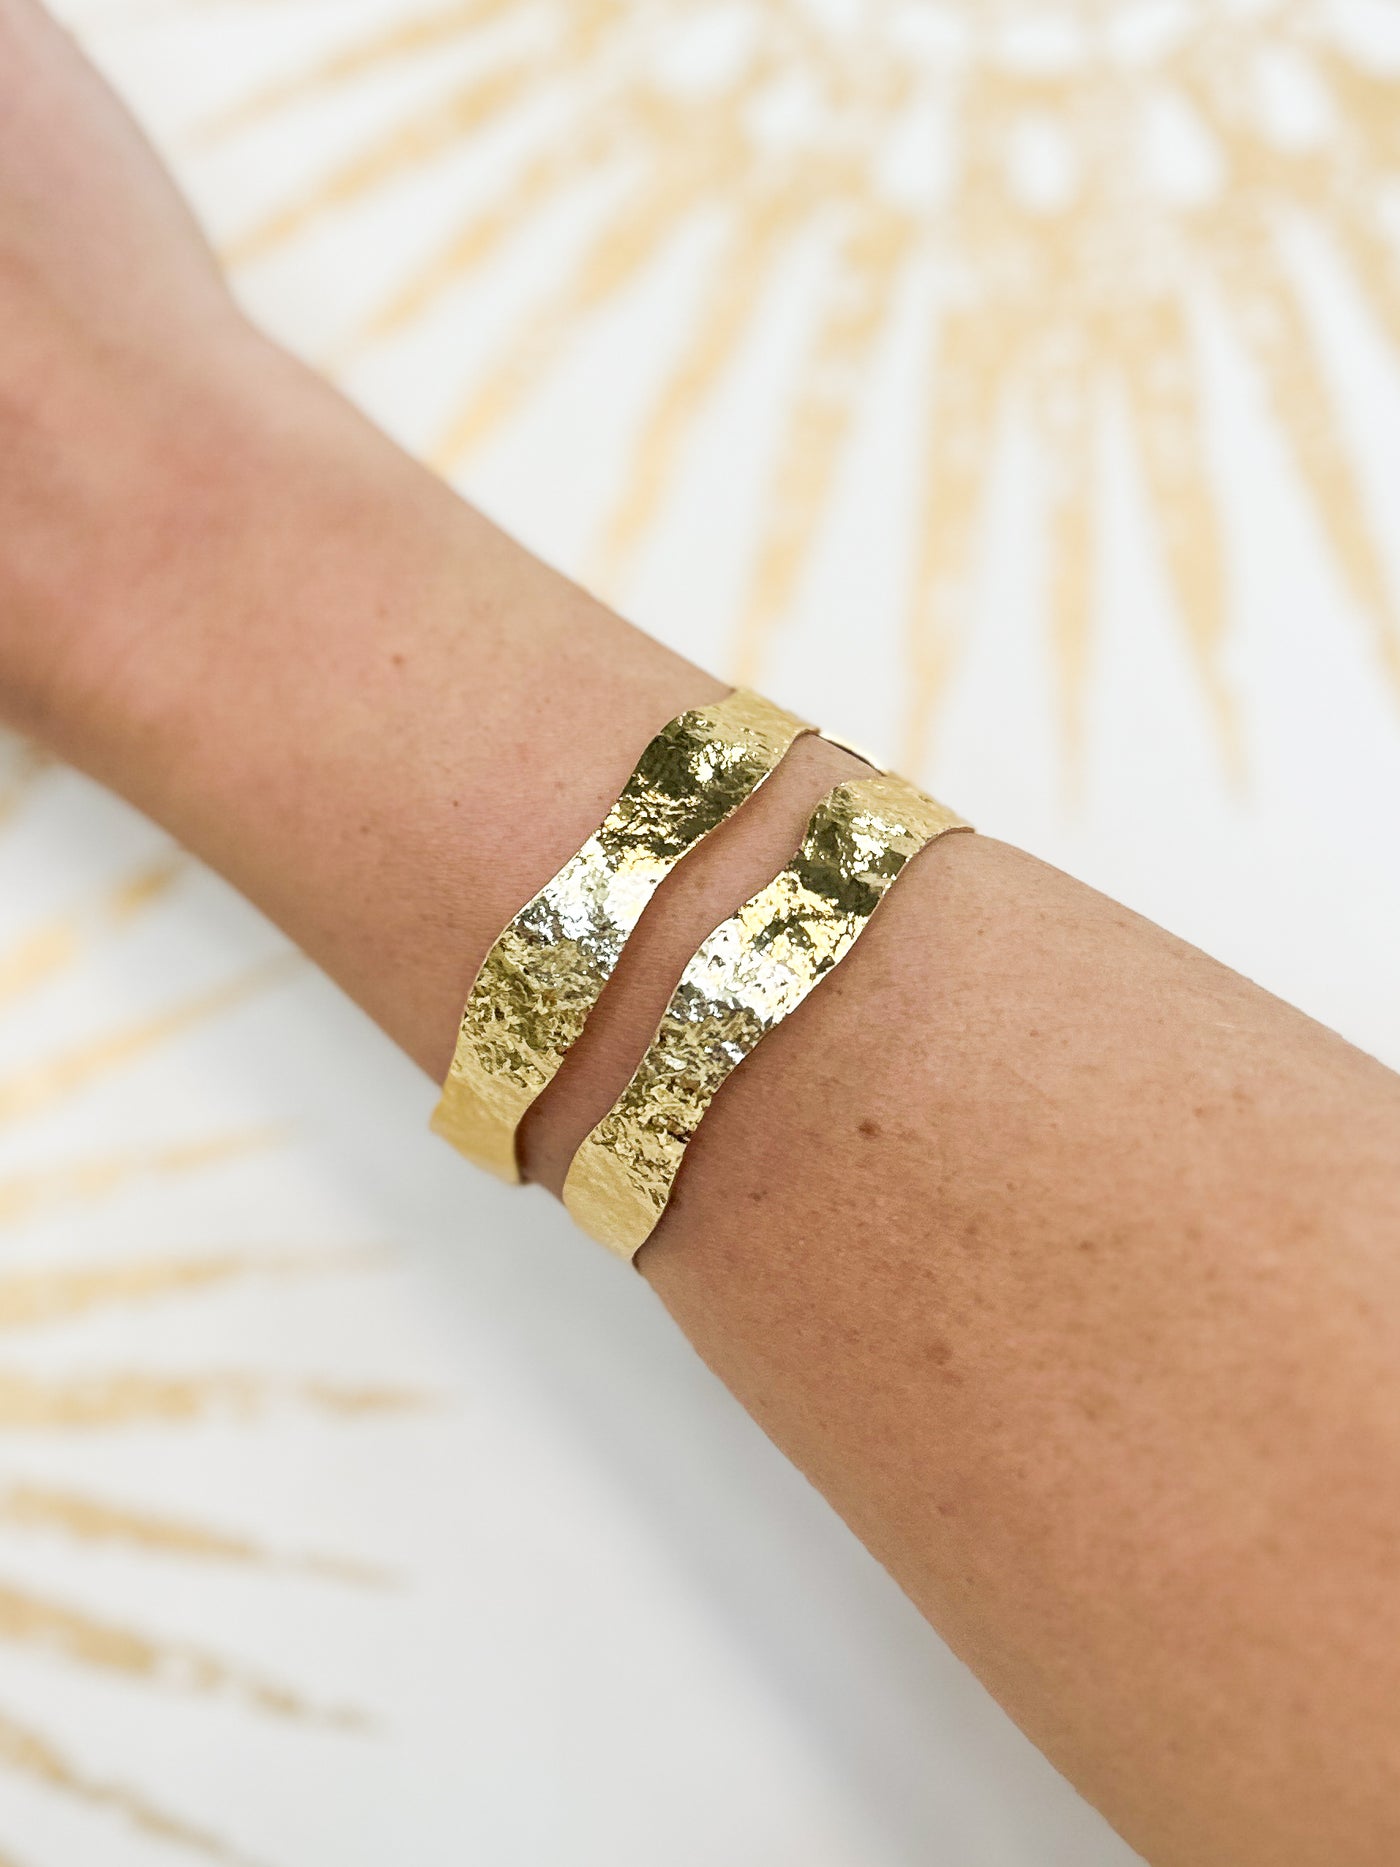 The Double Plate Cuff